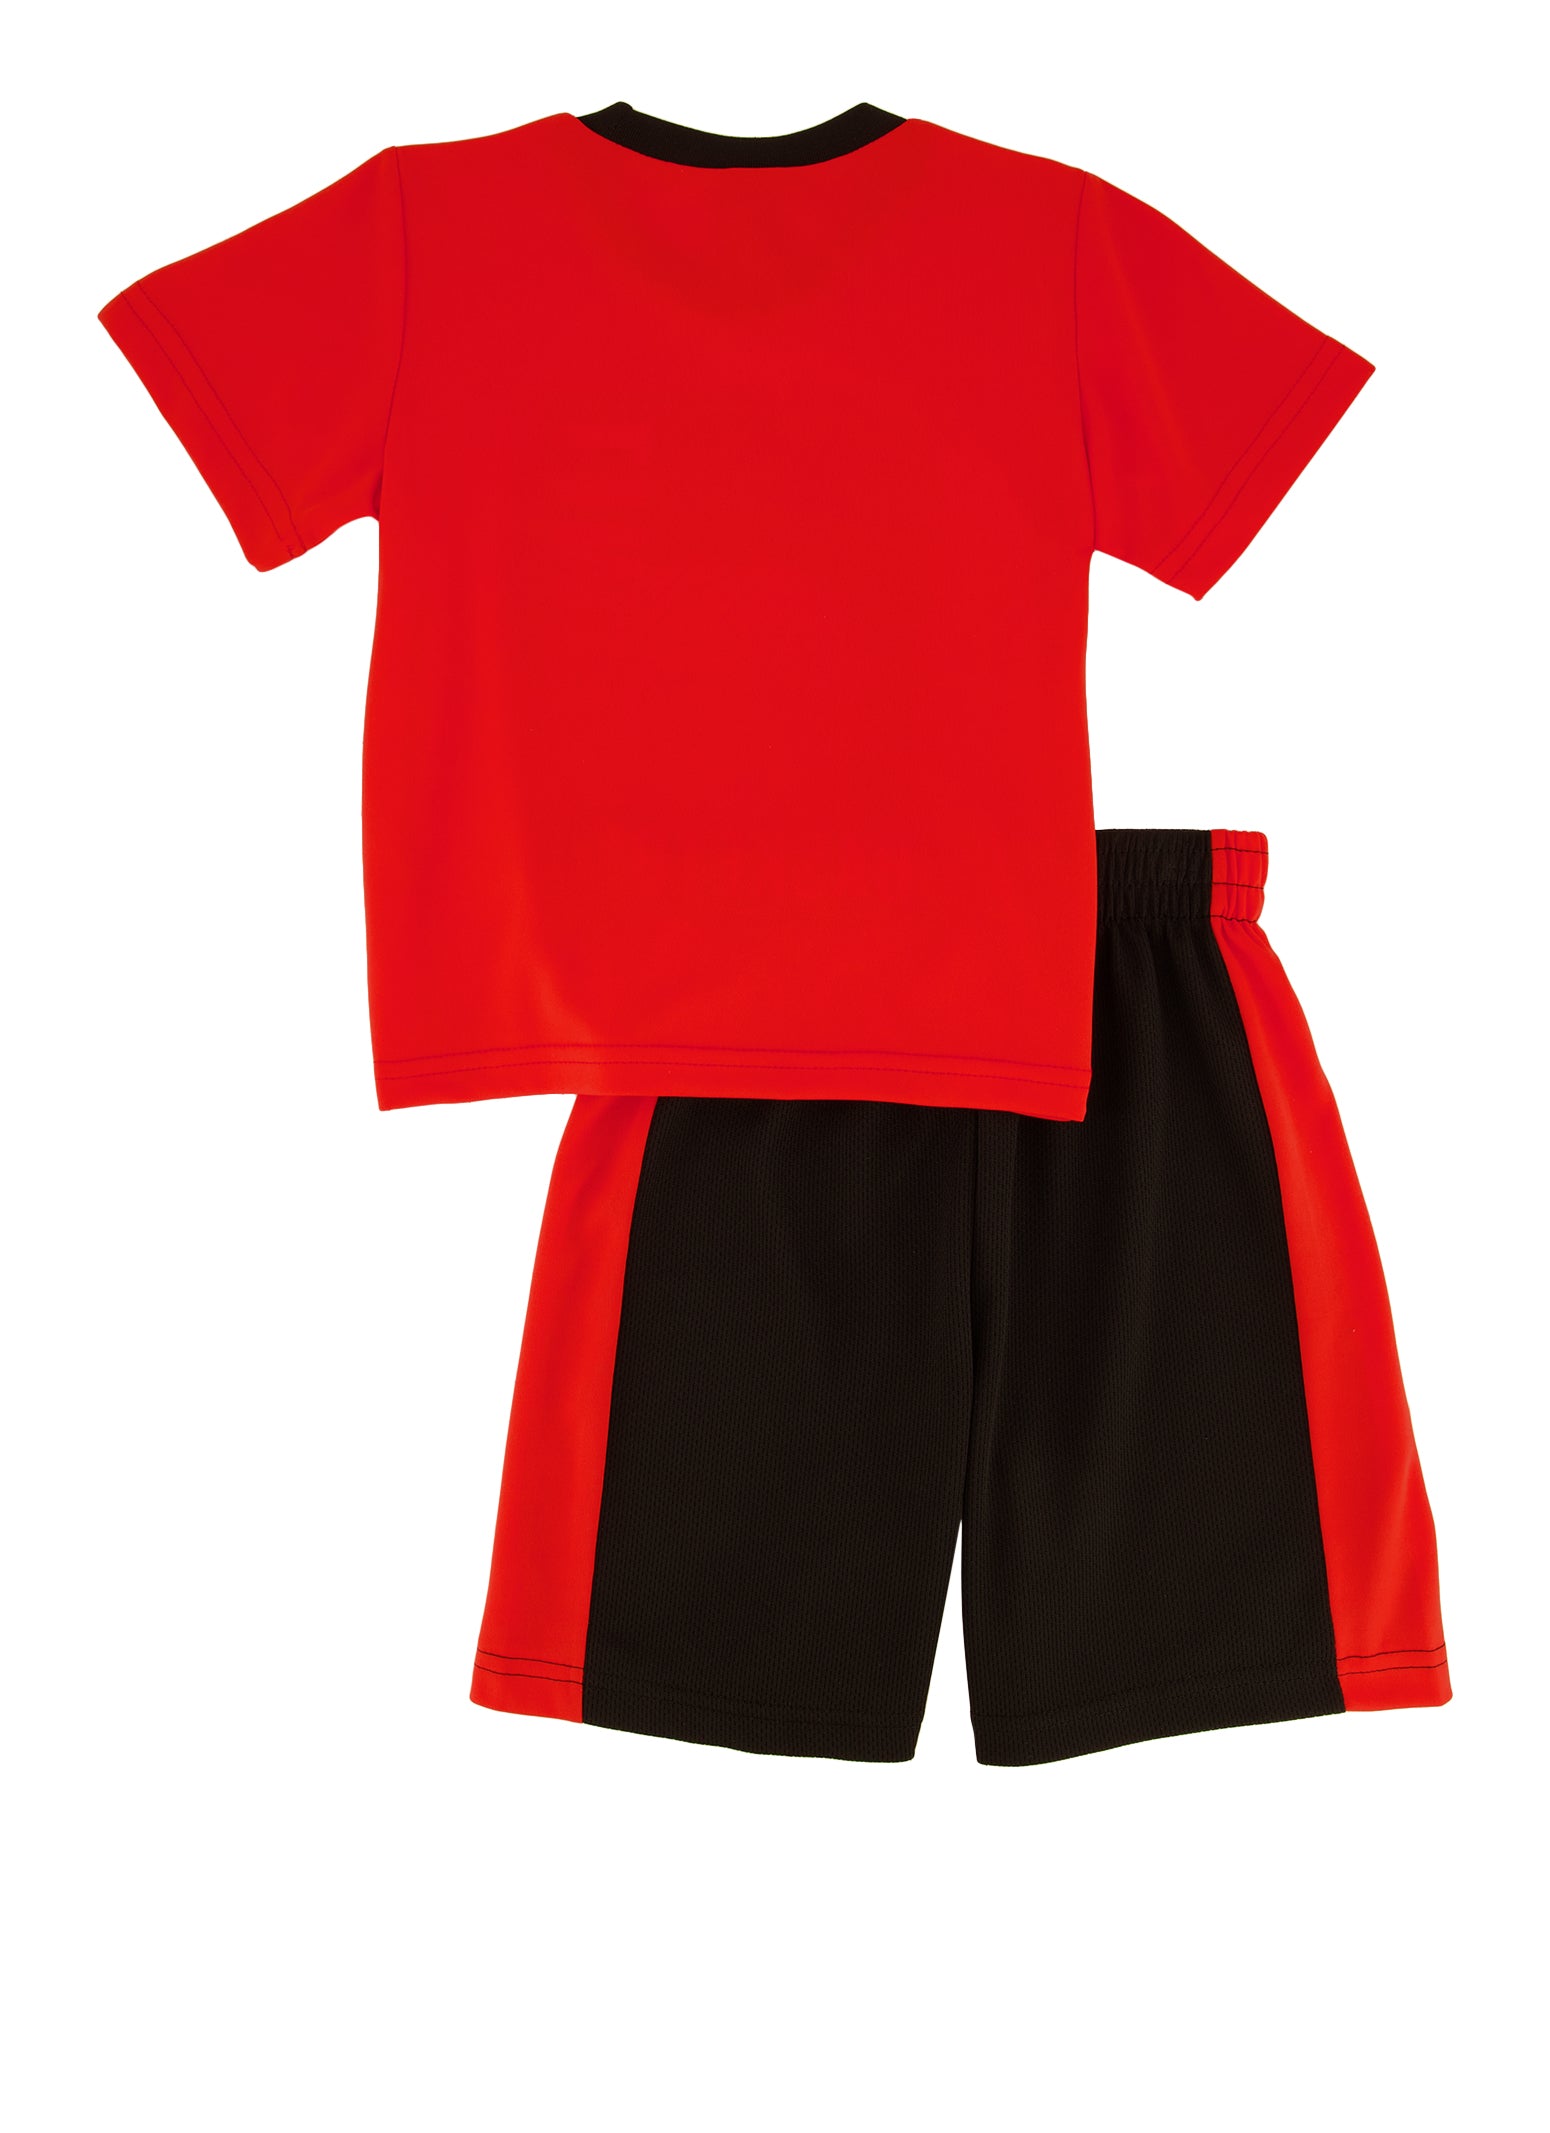 Little Boys No Limits Graphic Tee and Basketball Shorts,